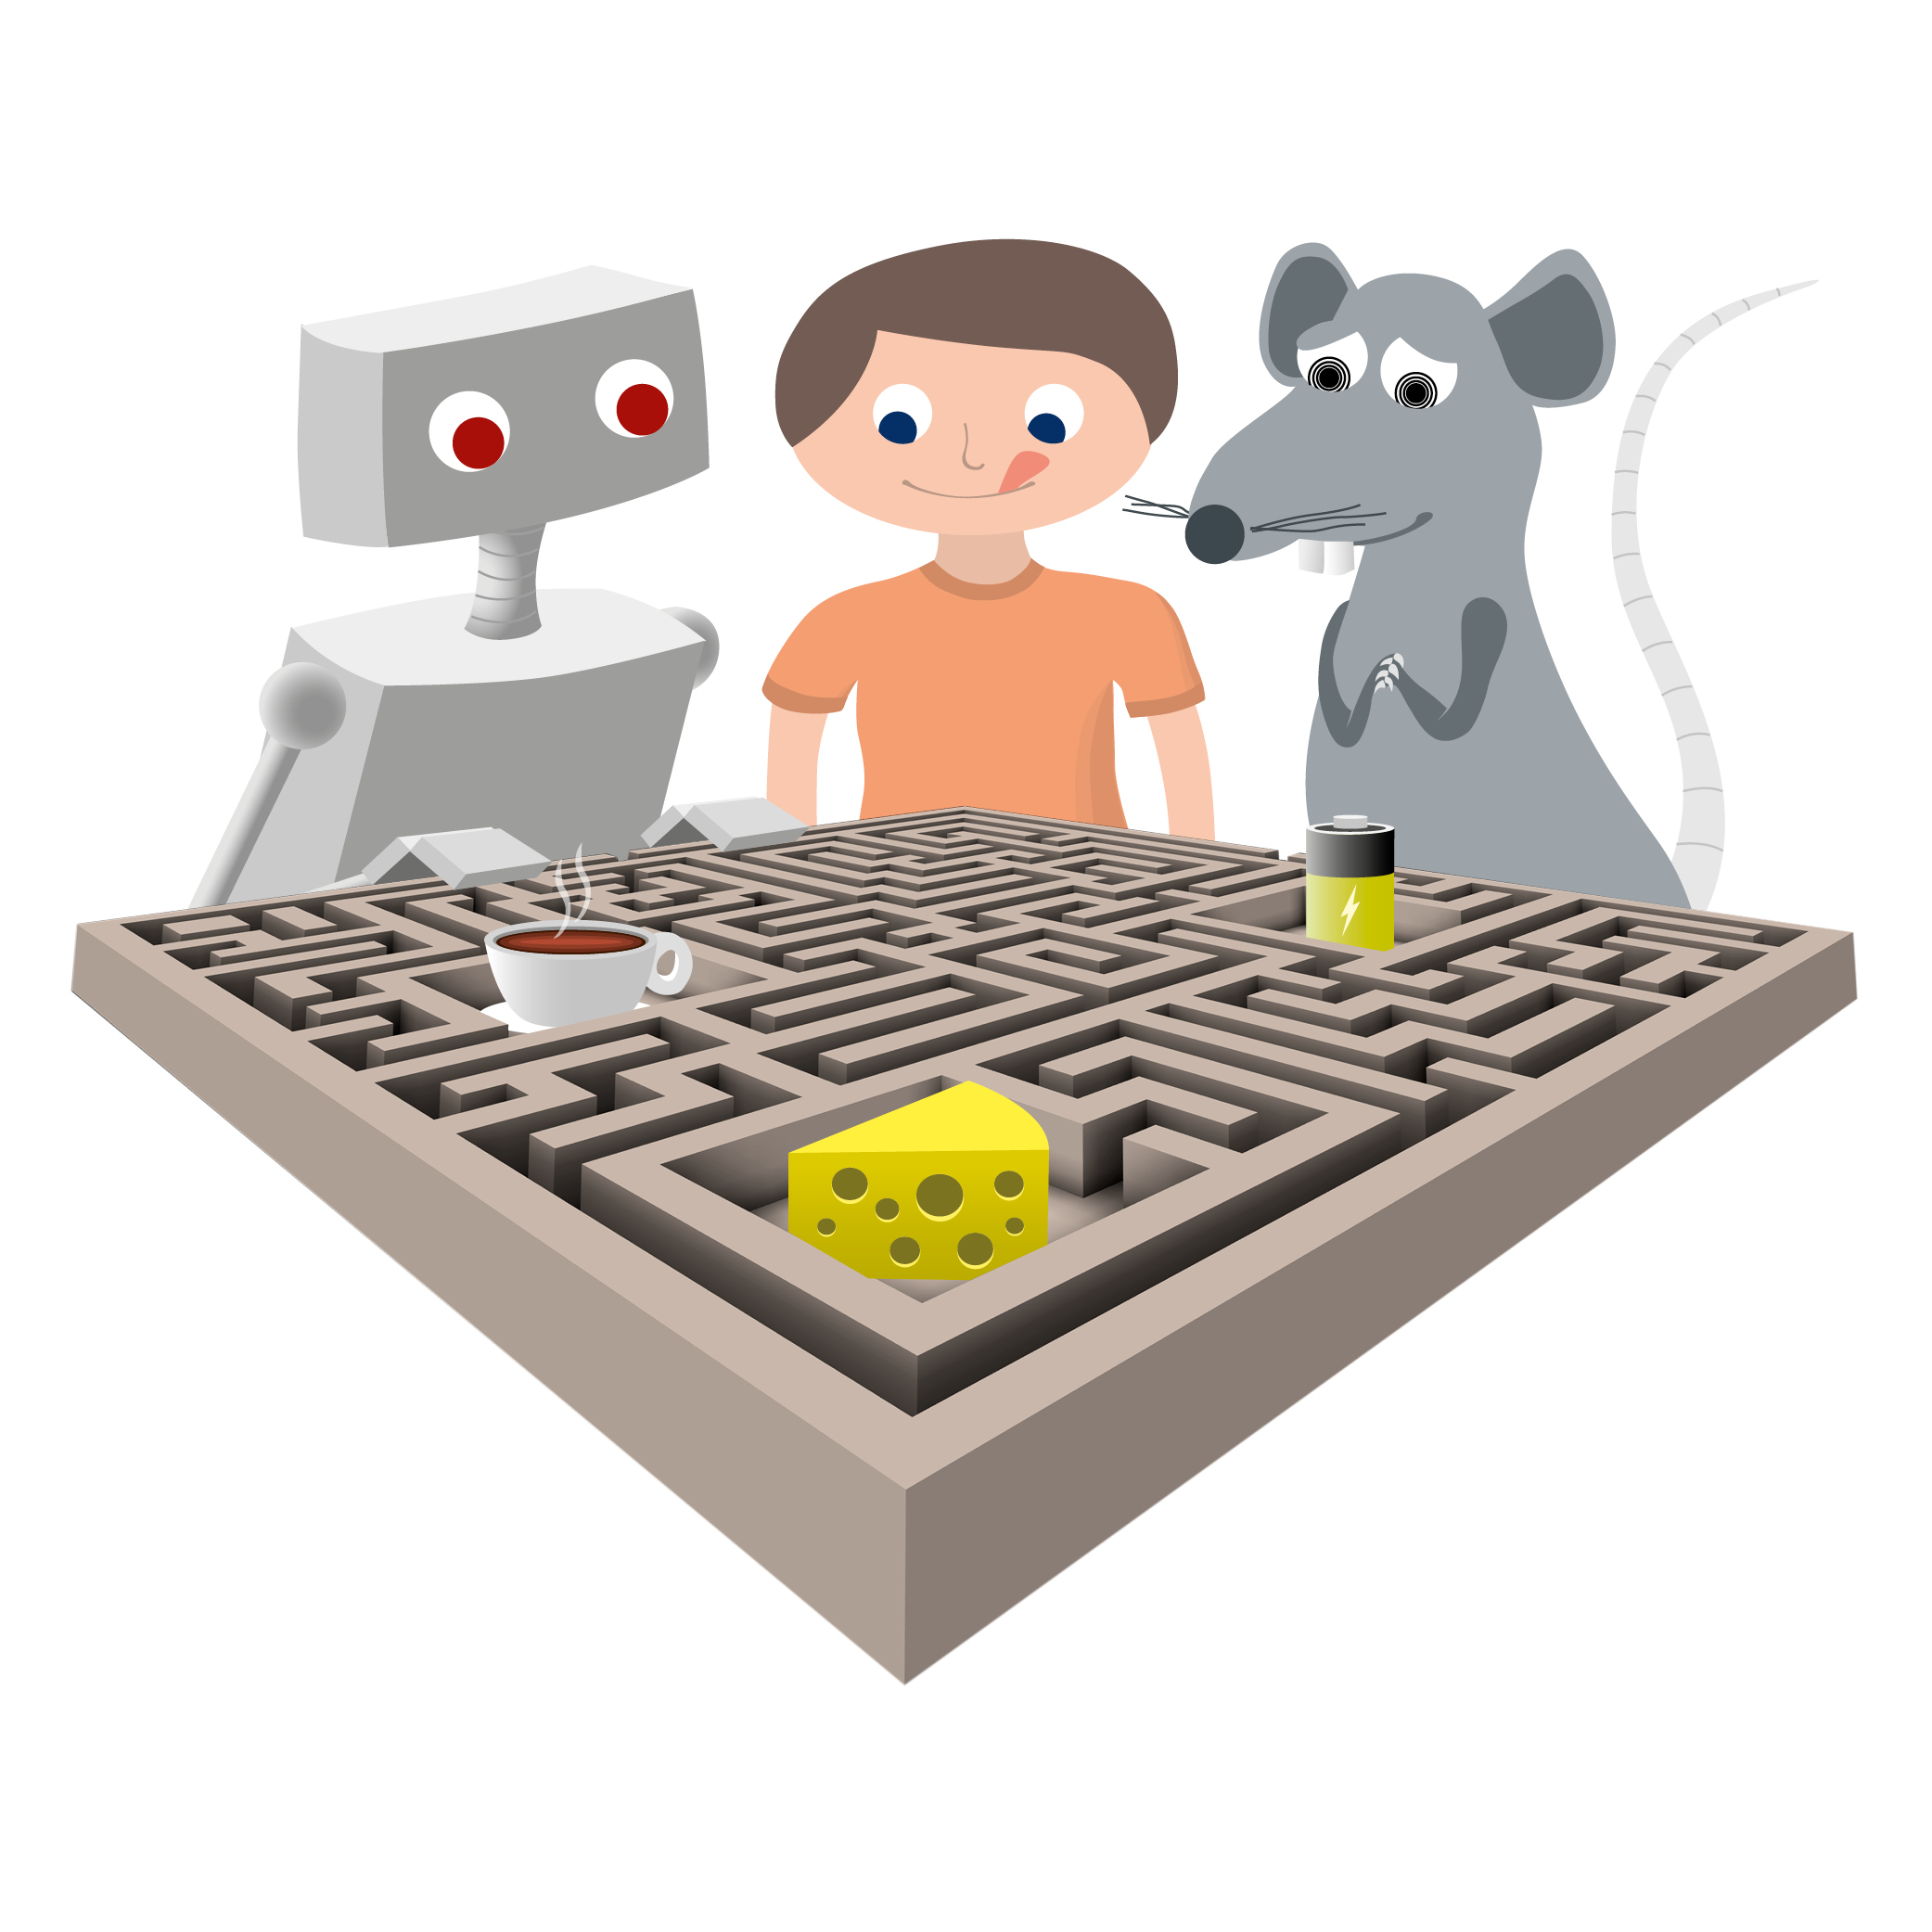 Graphic: A rat, a robot and a human sitting in front of a small labyrinth with cheese in it